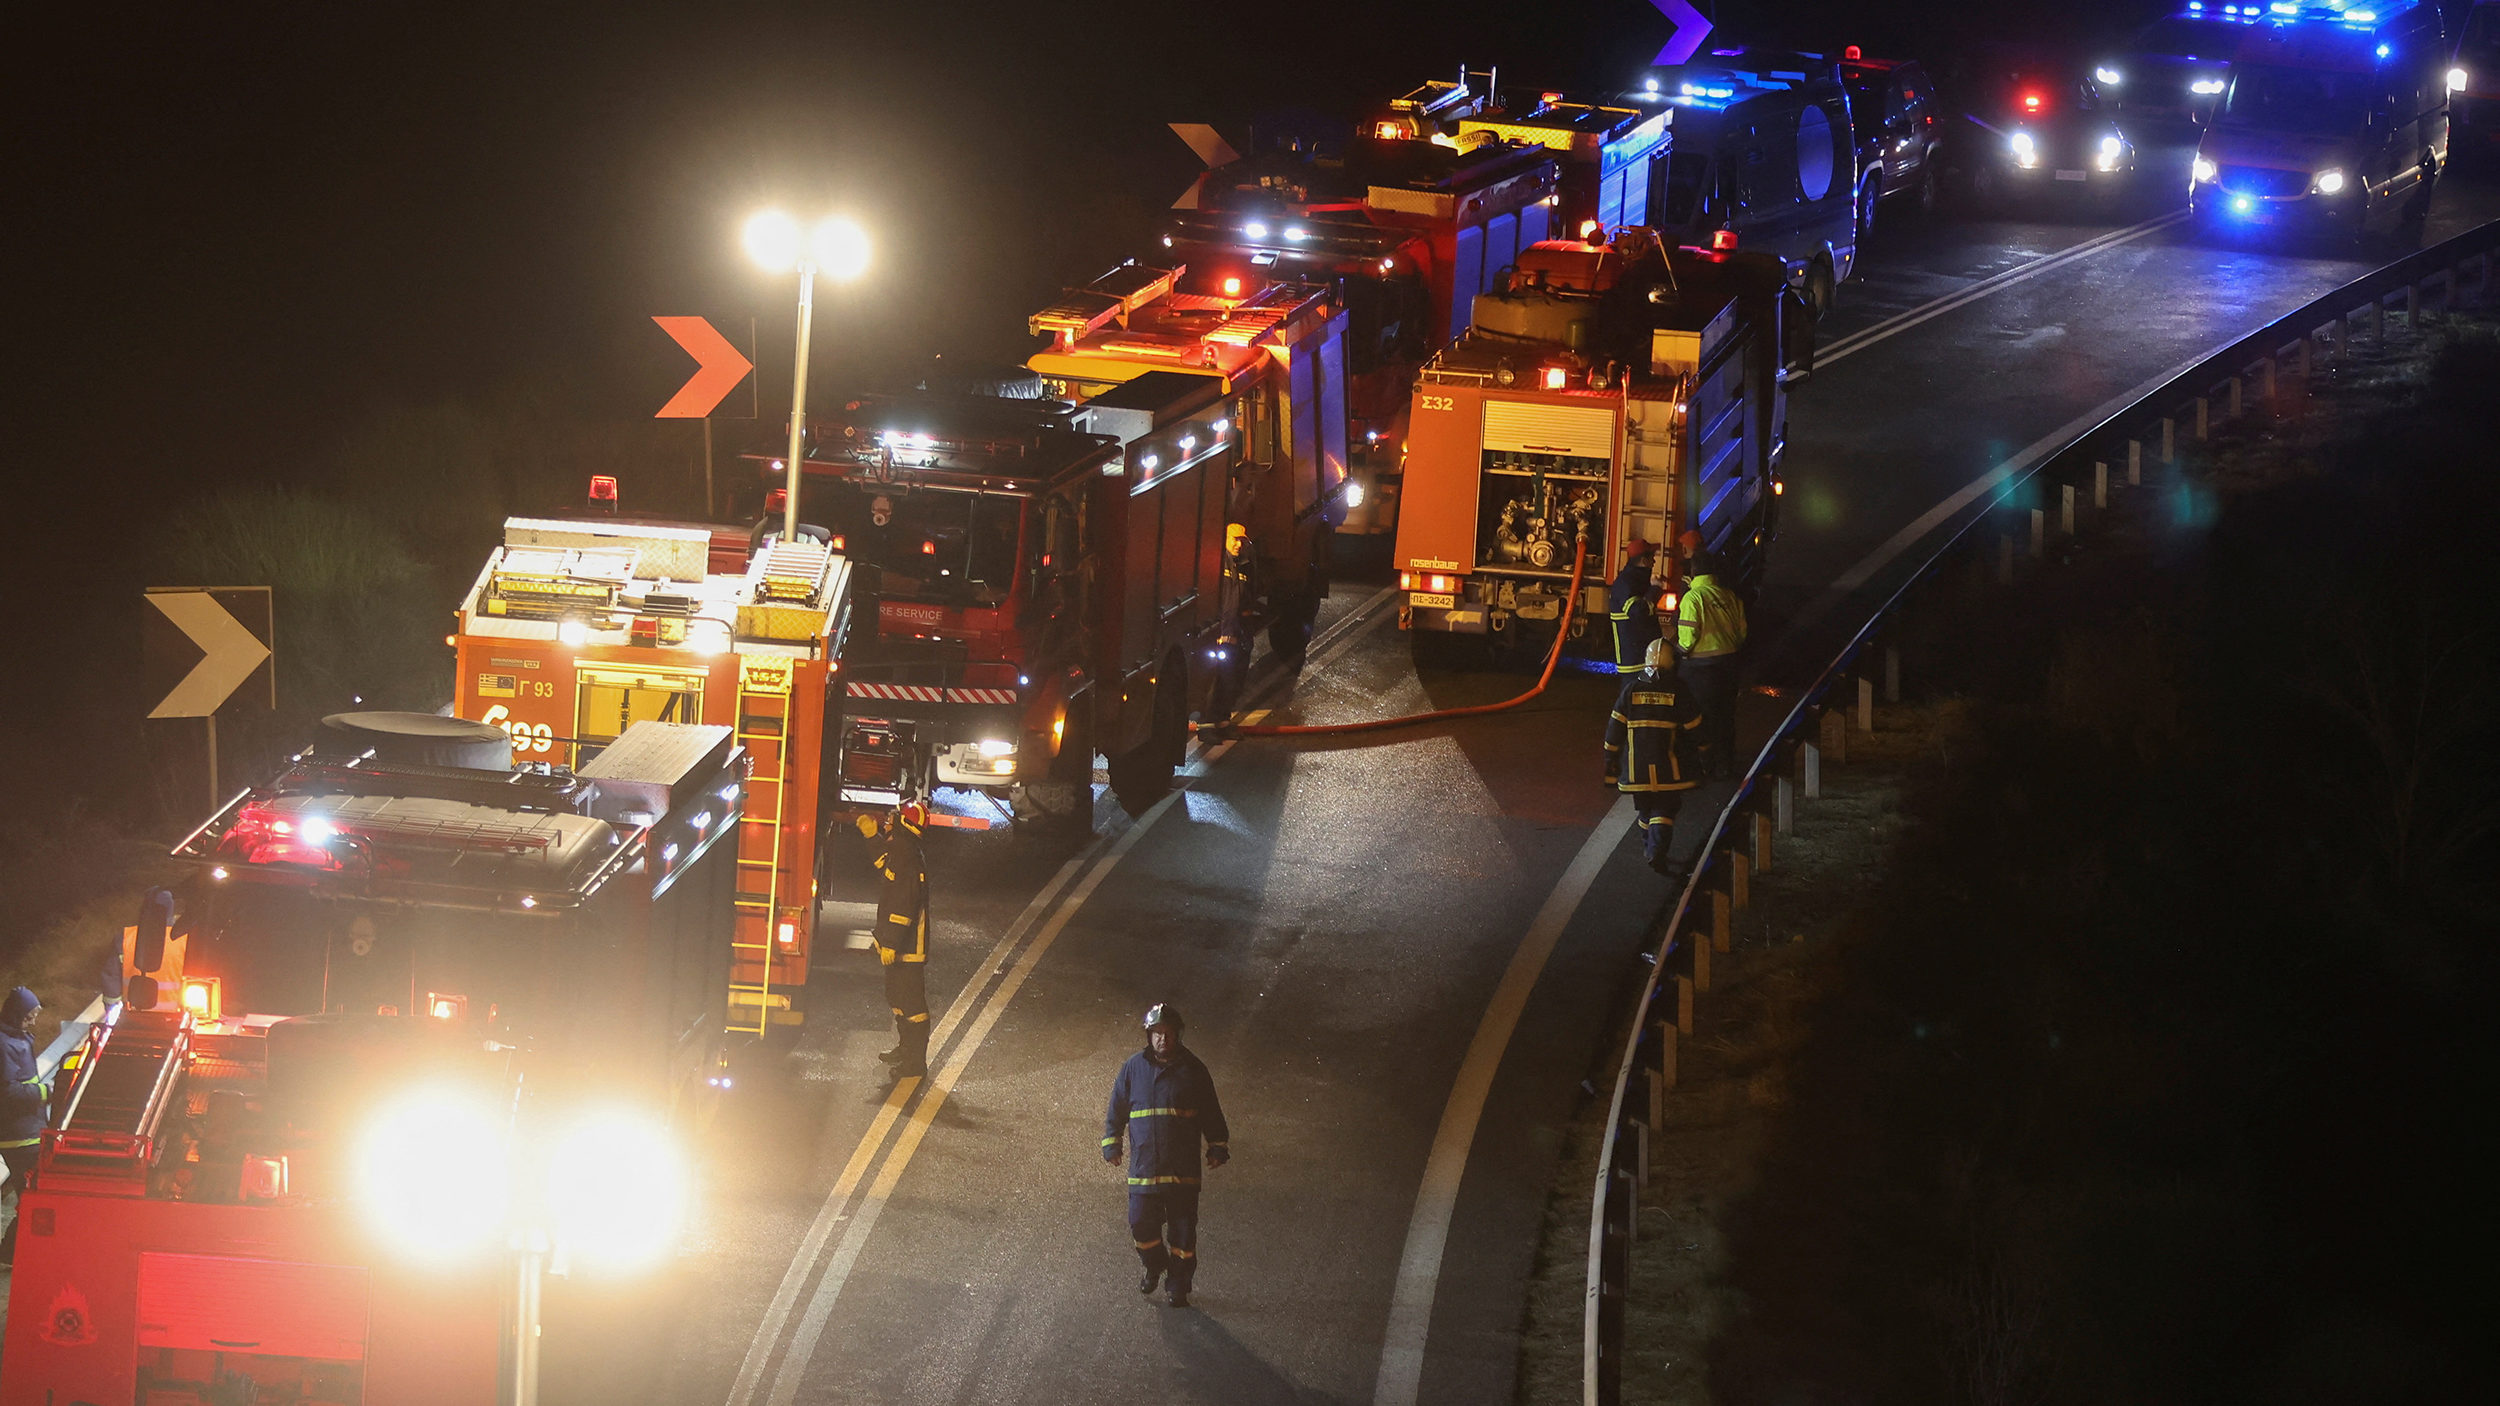 Firefighters attend the scene of the crash near the city of Larissa, Greece, on March 1. Photo cred...